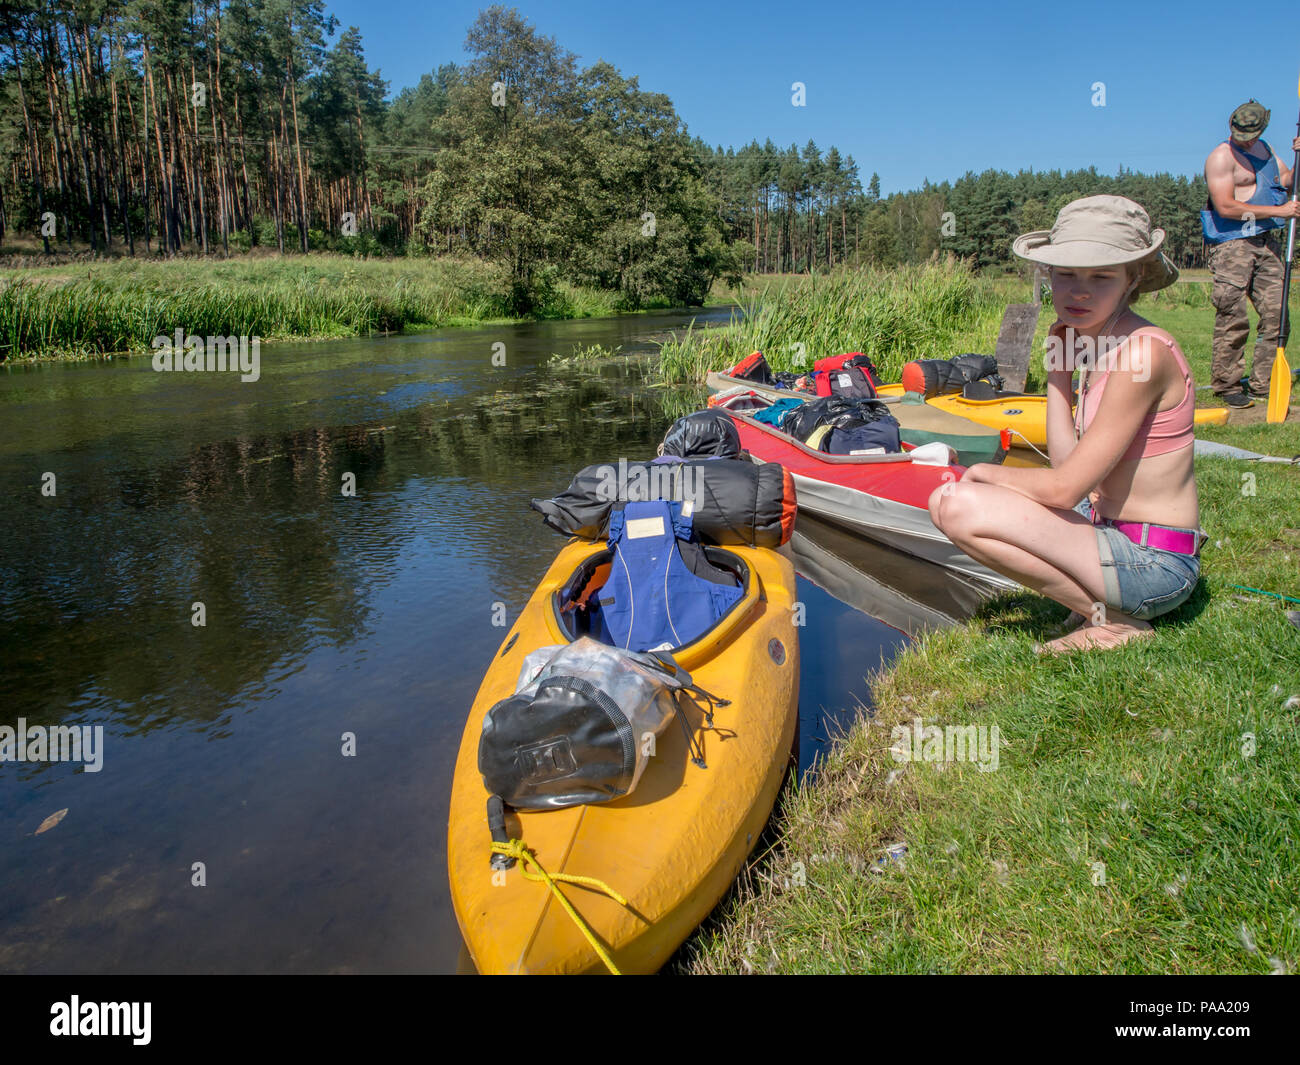 River Wda, Poland - August 26, 2016: Kayaker on the bank of the river,  during canoeing excursion on the folding kayak. Bory Tucholskie Stock Photo  - Alamy